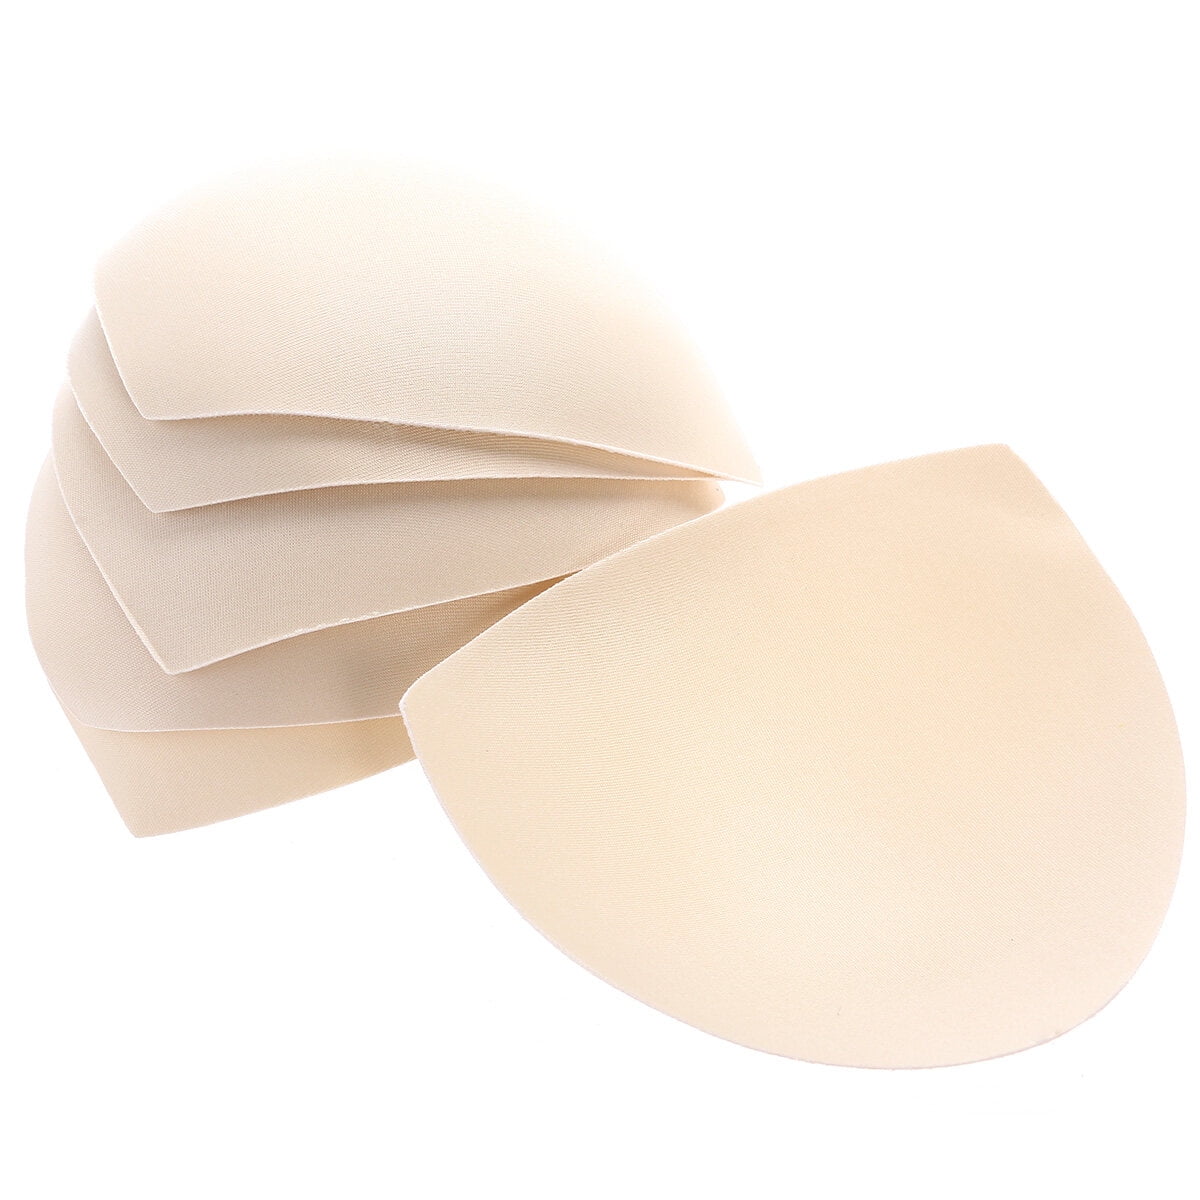 3 Pairs Bra Pad Inserts Removable Bra Pads Sewn Padded for Sports Bra A/B  or C/D,D/E Cup,Skin-Color 